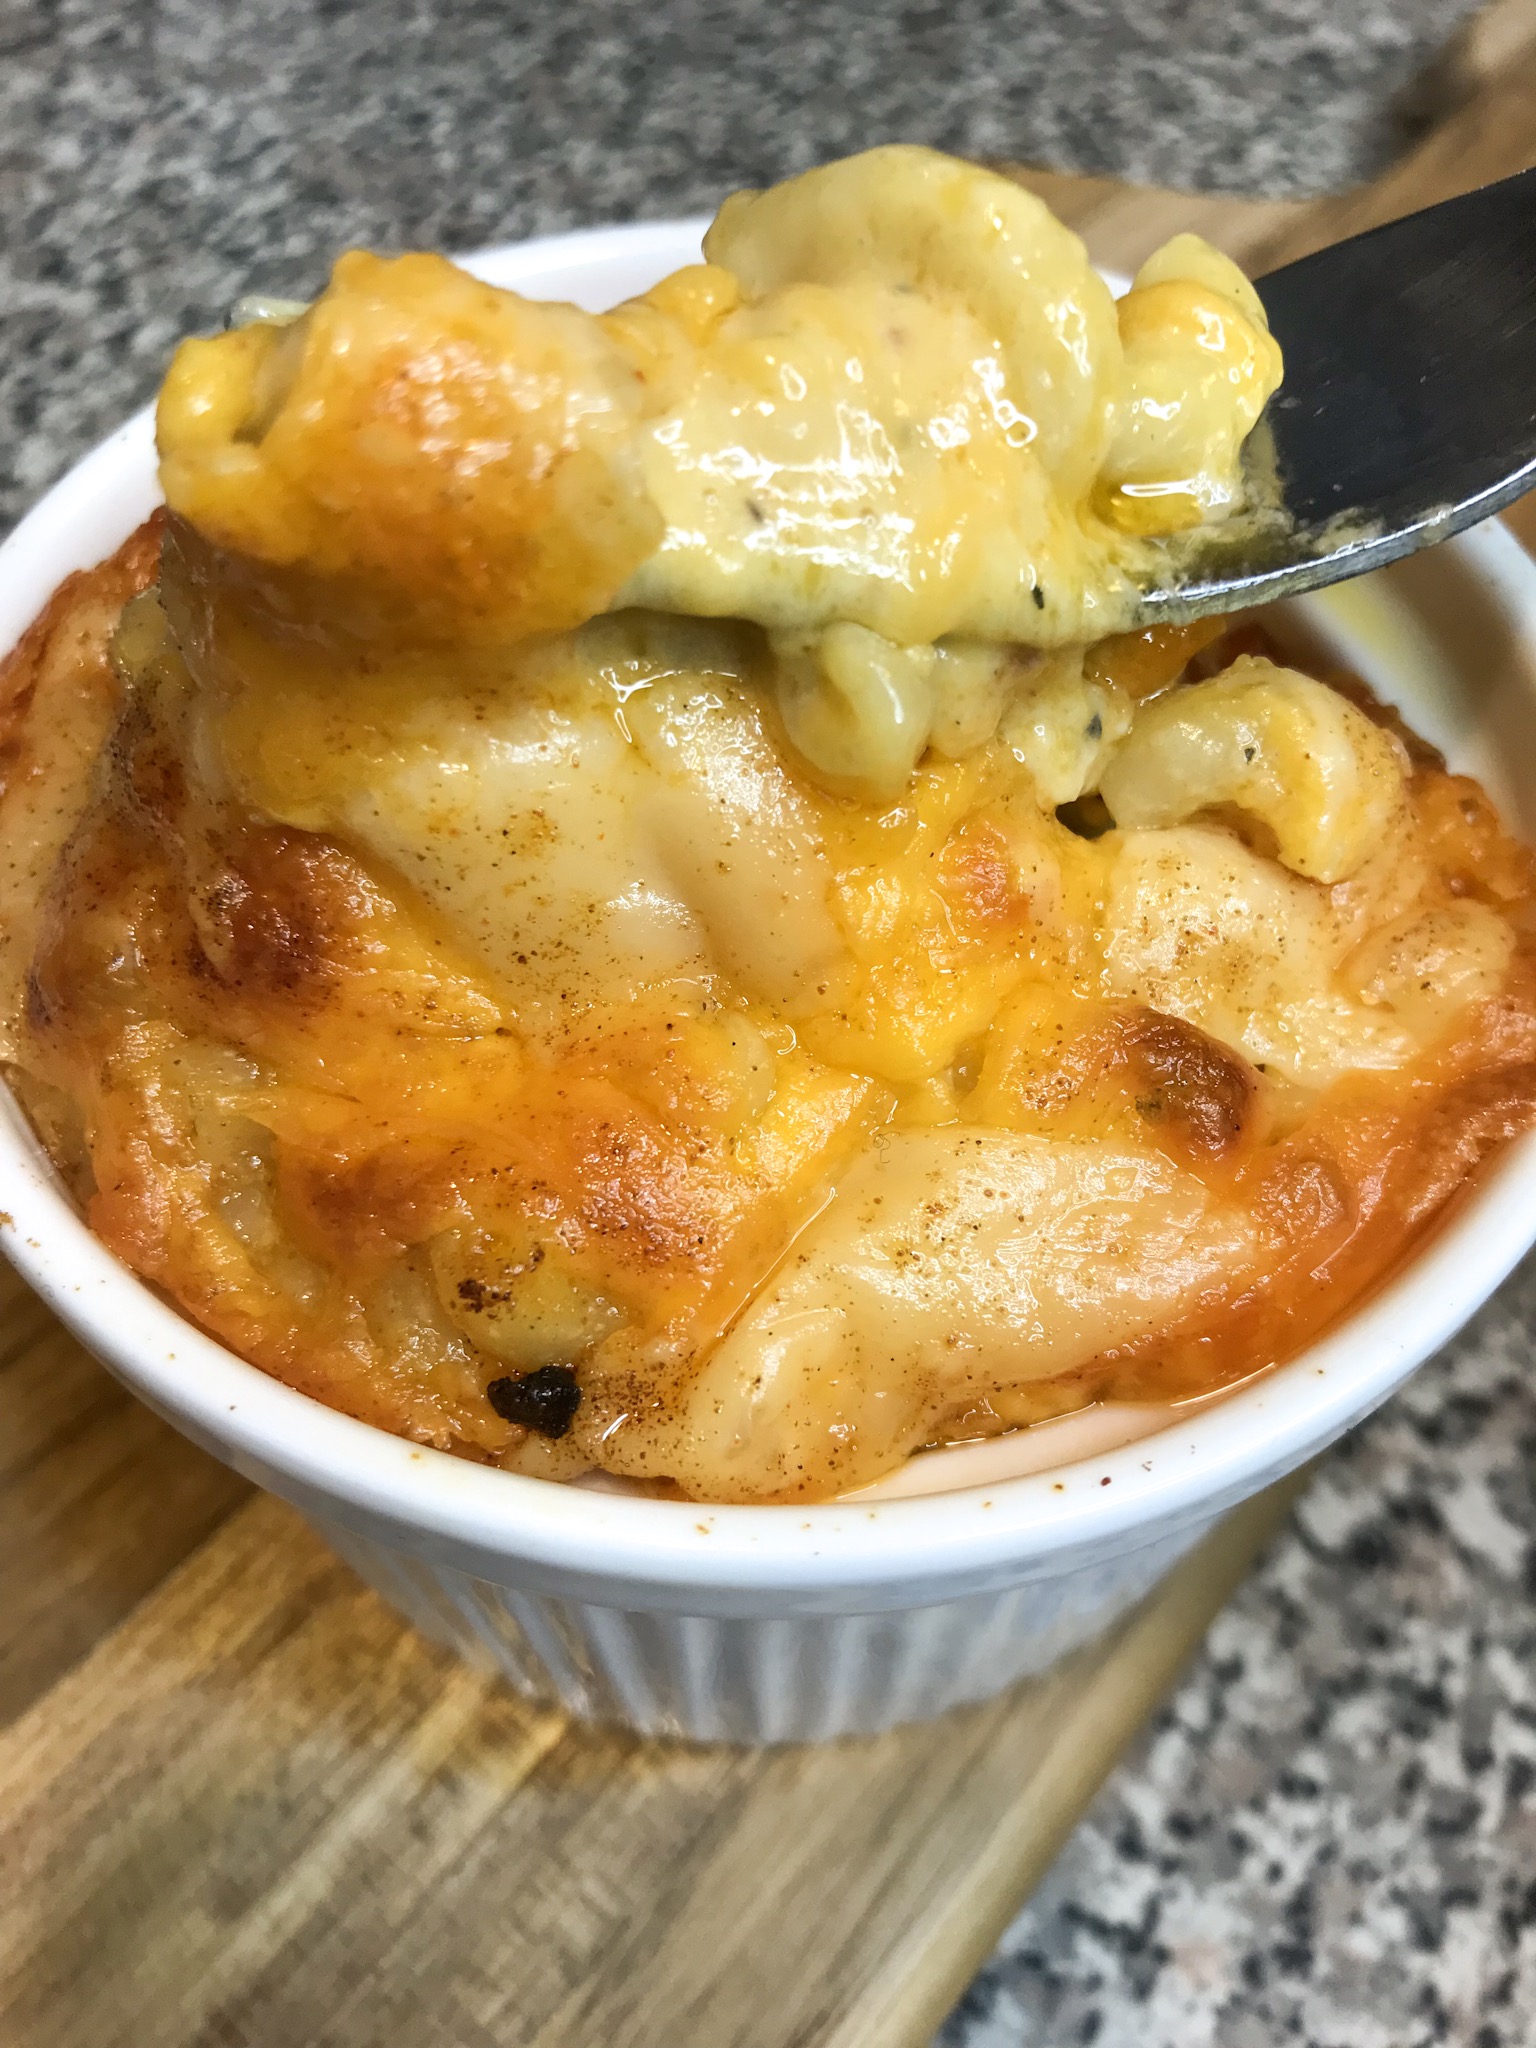 Personal Mac and cheese